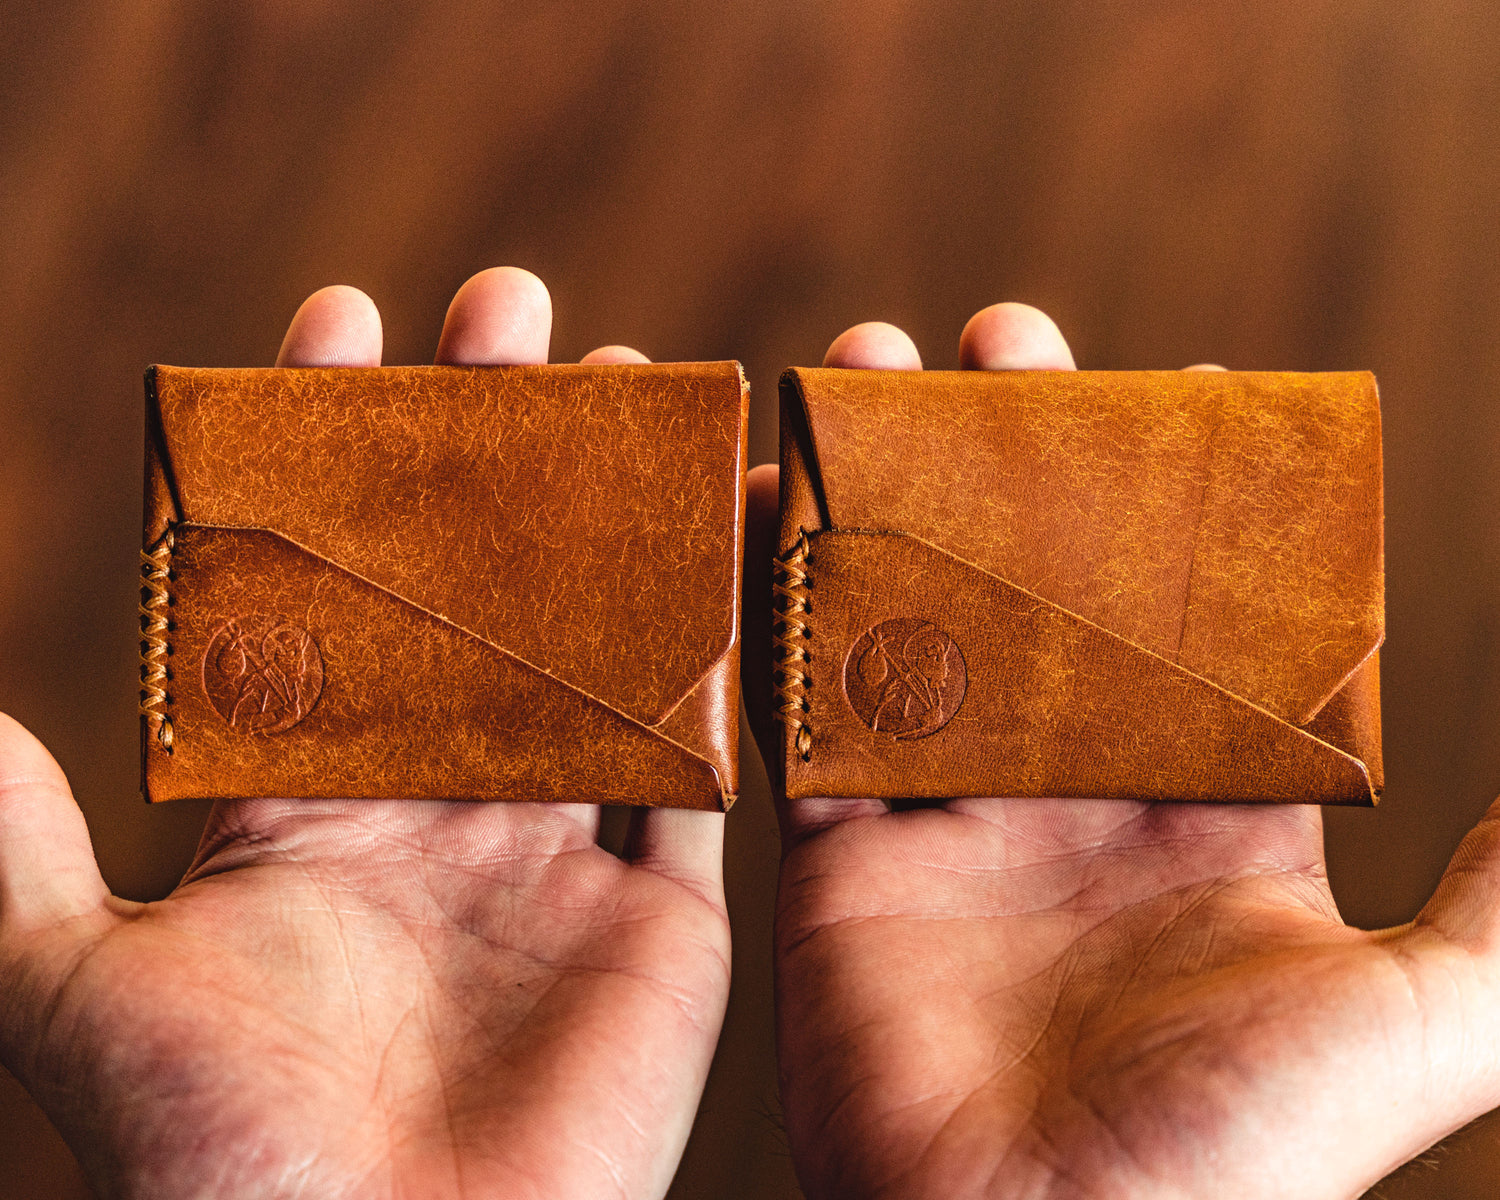 Two Carry Commission / Open Sea Leather Gun Deck Minis in cognac side by side showing a new and a used wallet and the patina differential